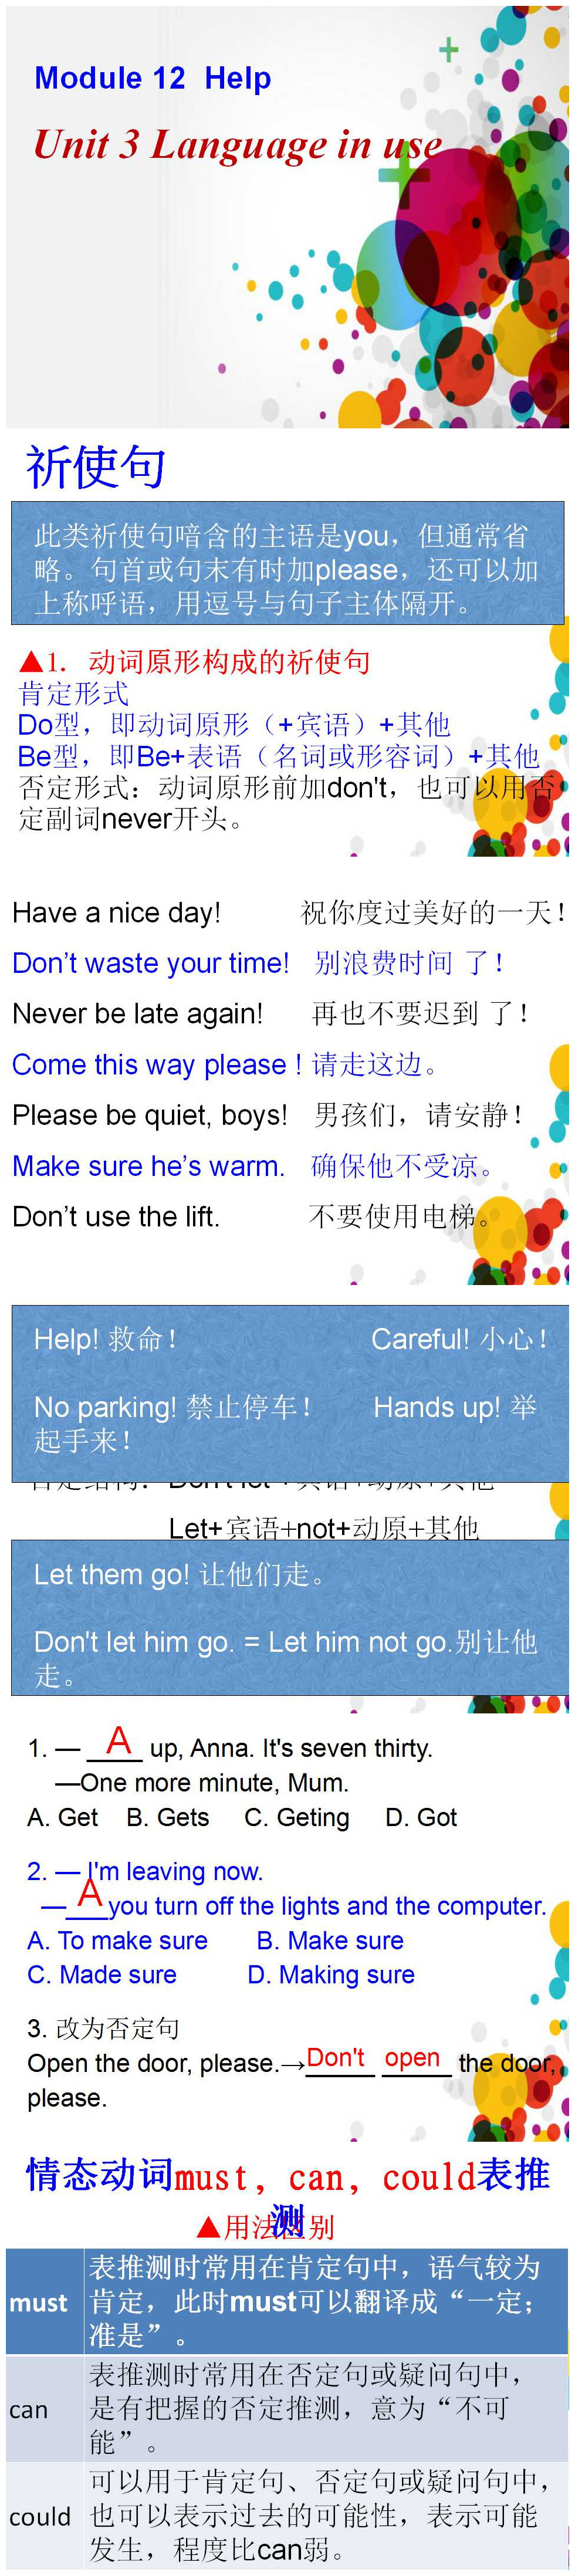 《Language in use》Help PPT课件4